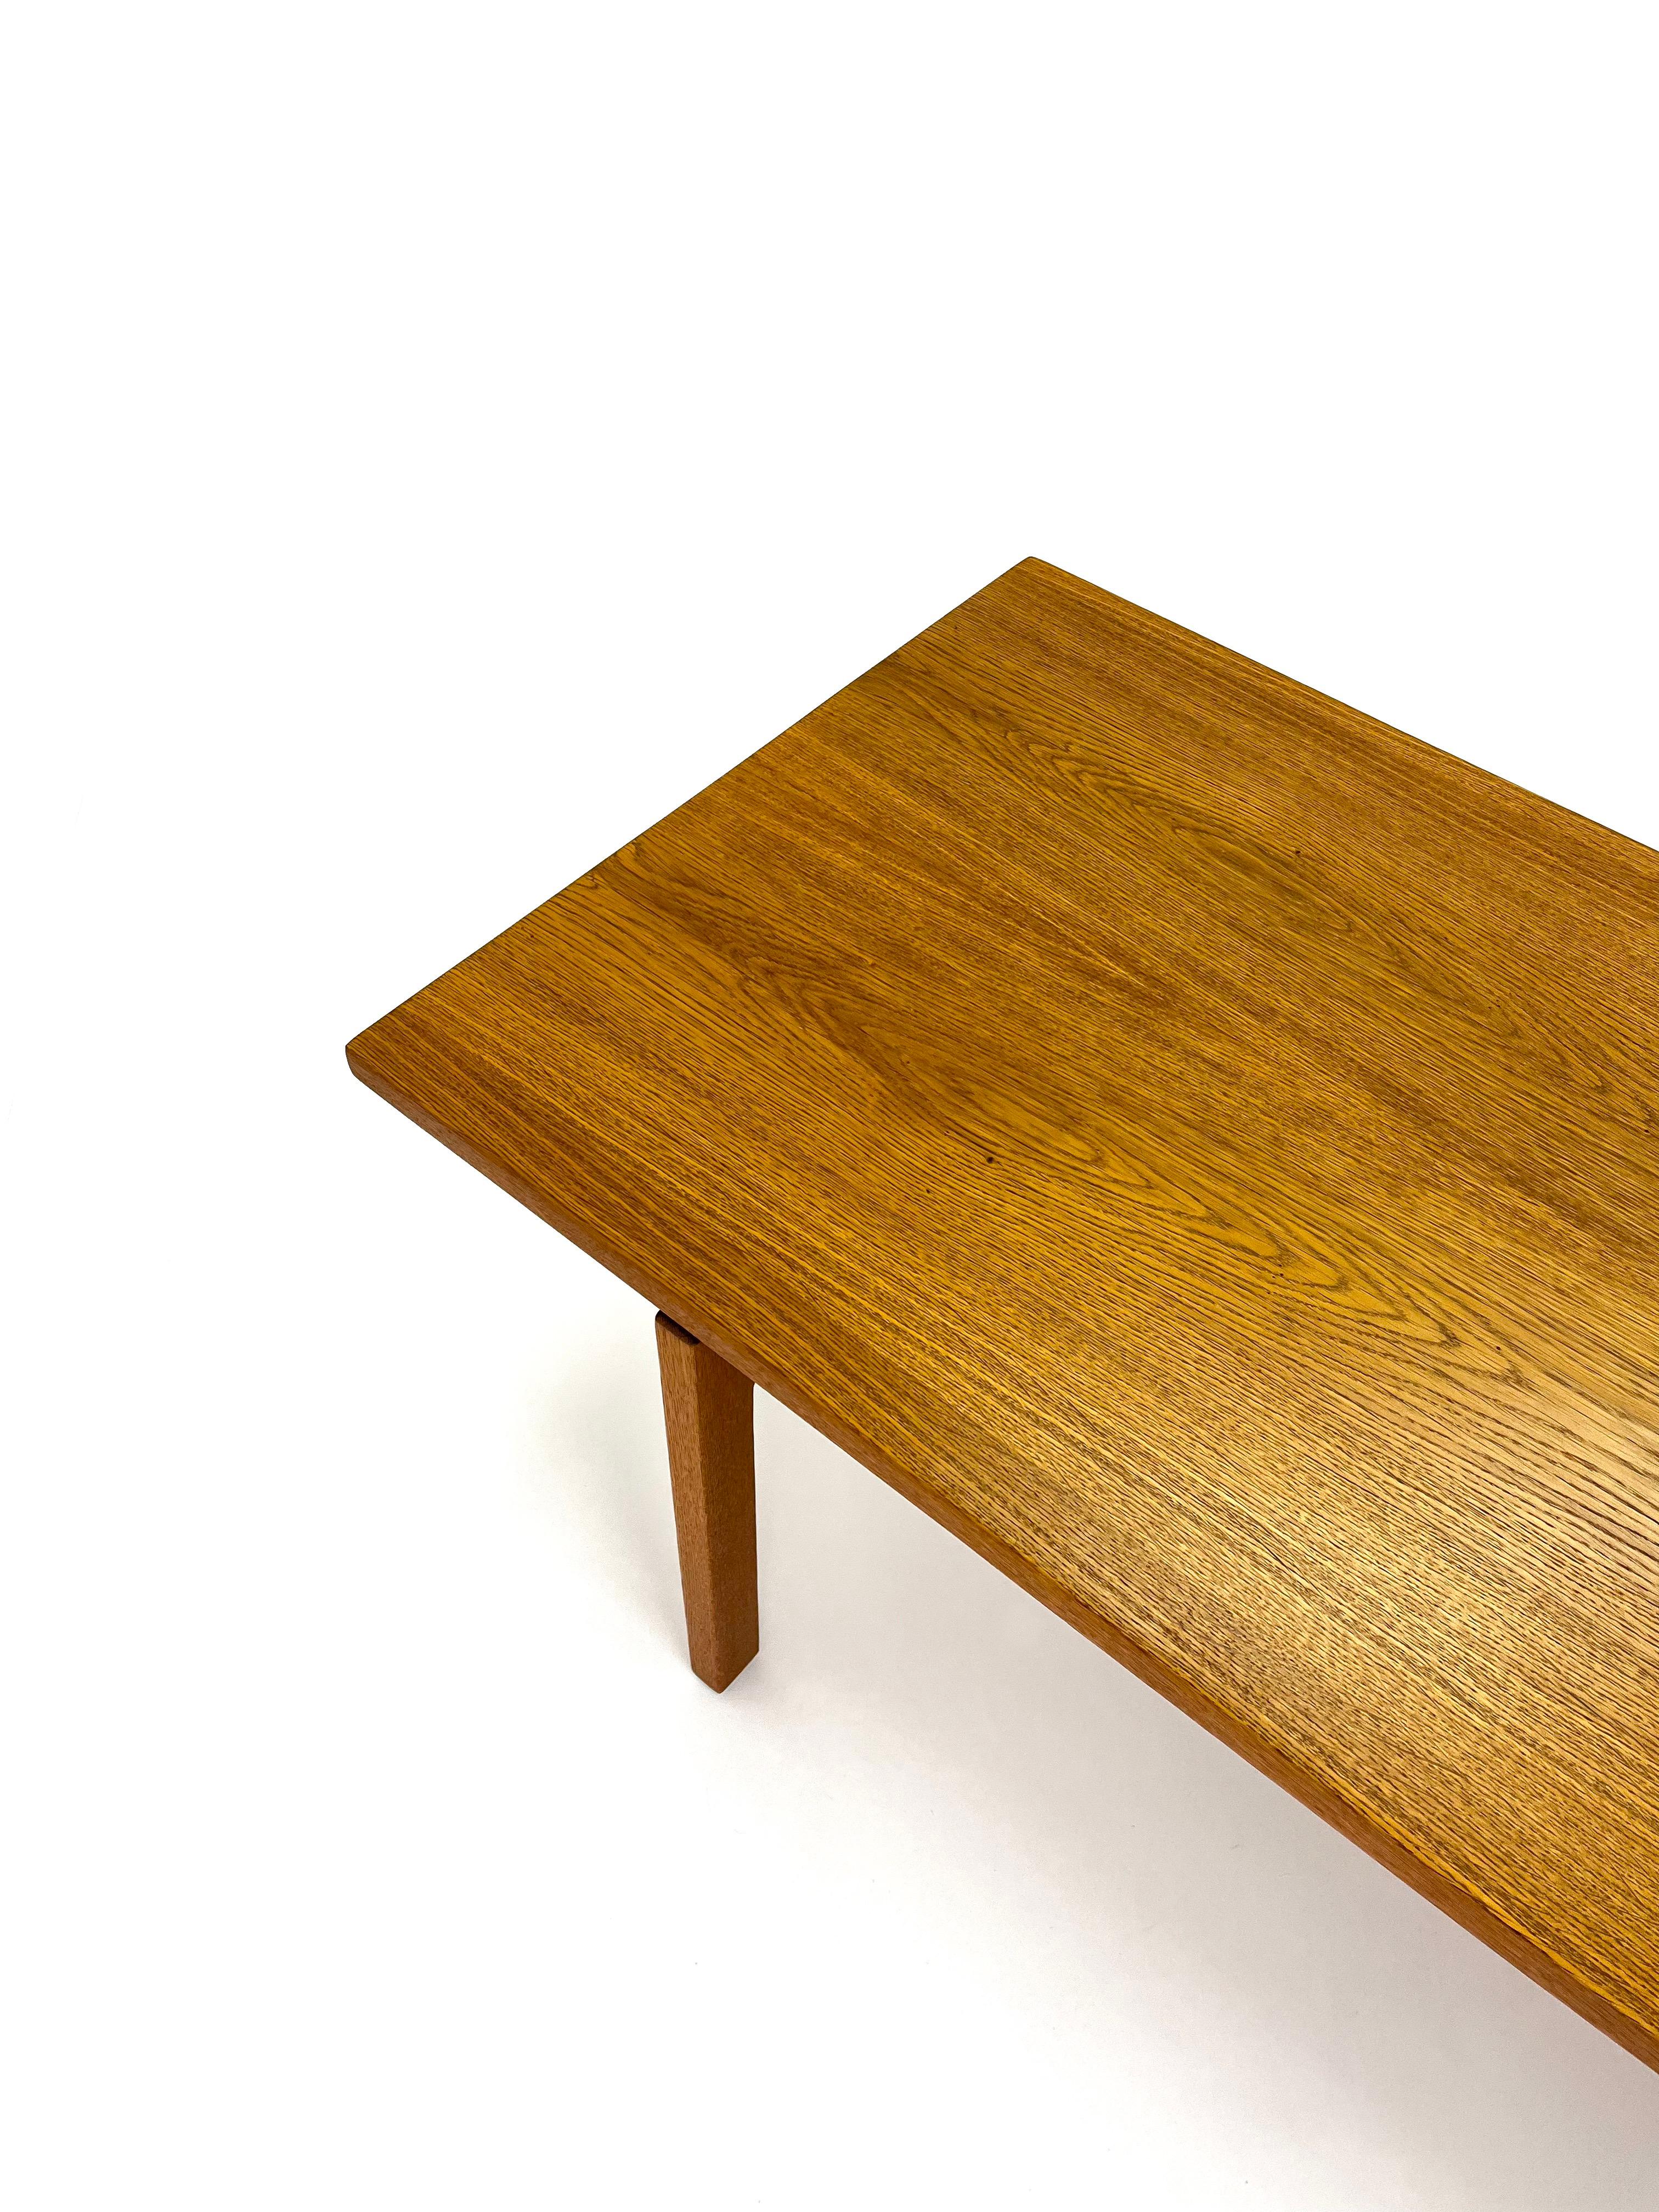 Mid-20th Century Hans Wegner for Andreas Tuck Oak Coffee Table, Model AT-15 For Sale